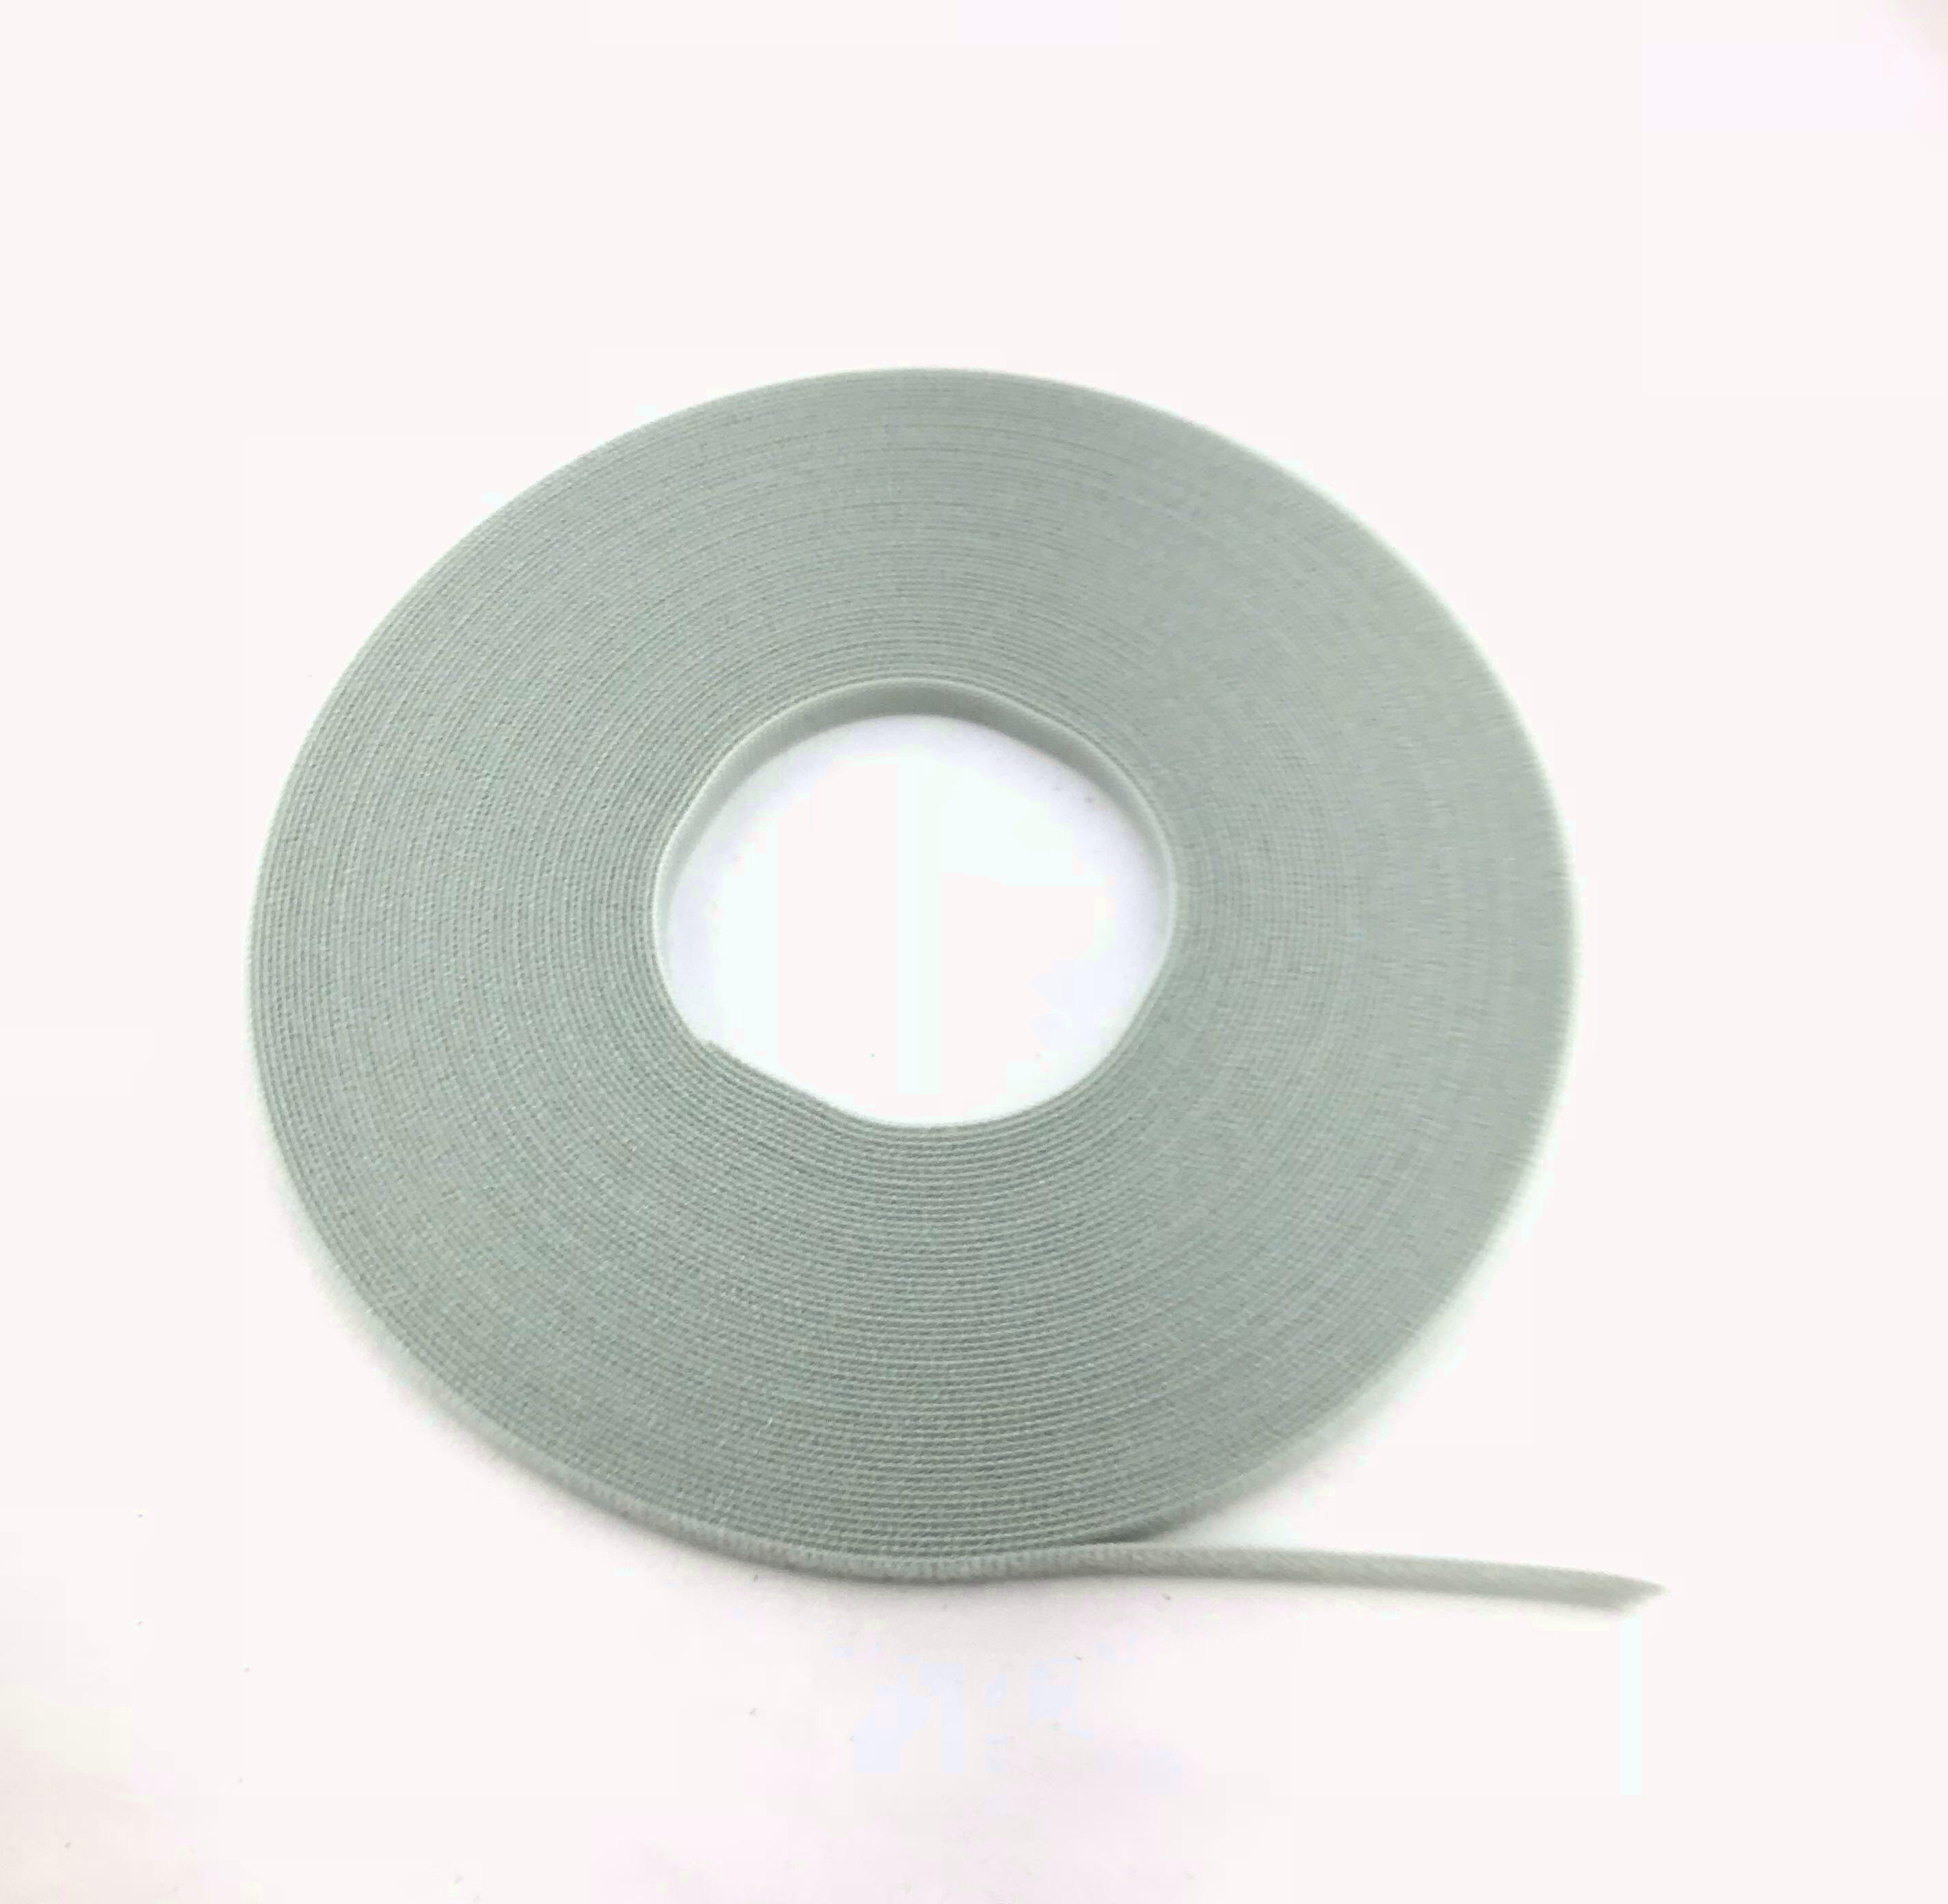 5 Yd EXTRA Thin Doll Clothes VELCRO® Brand Sew-on Hook and Loop / Ultra-thin  3/8 Wide VELCRO® Brand Fastener/ Many Colors Available 